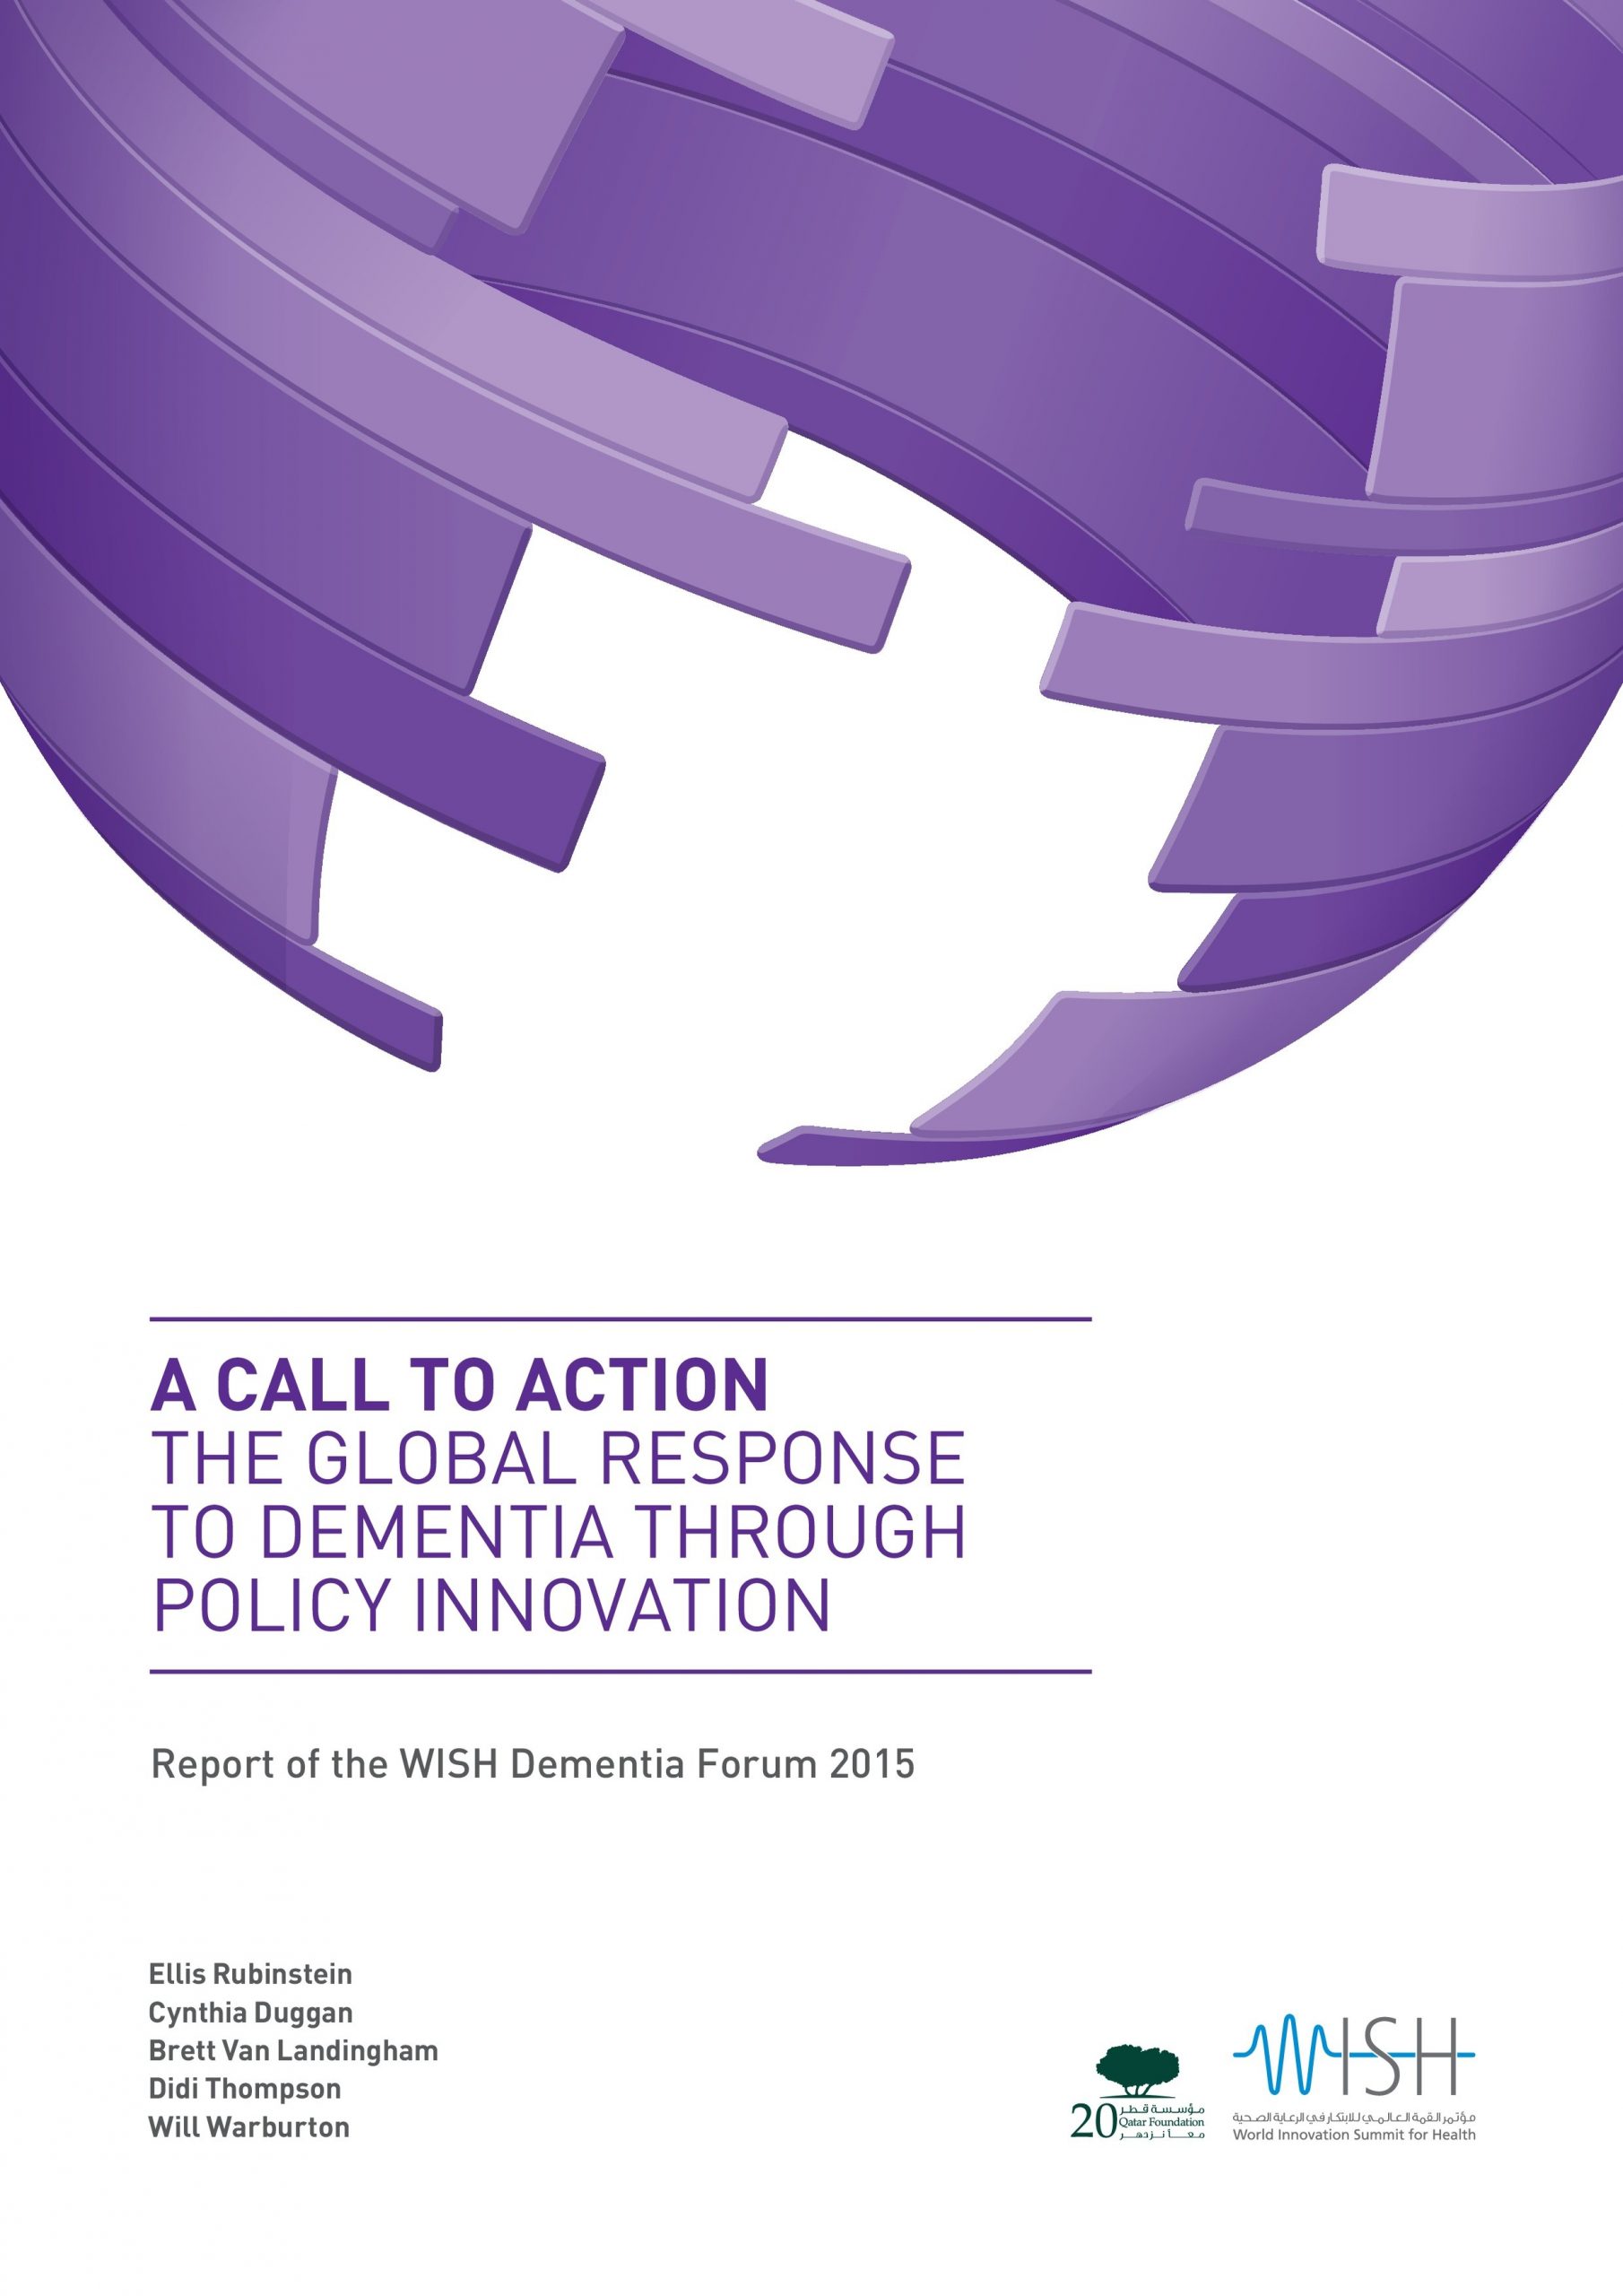 A Call to Action: The Global Response to Dementia Through Policy Innovation 